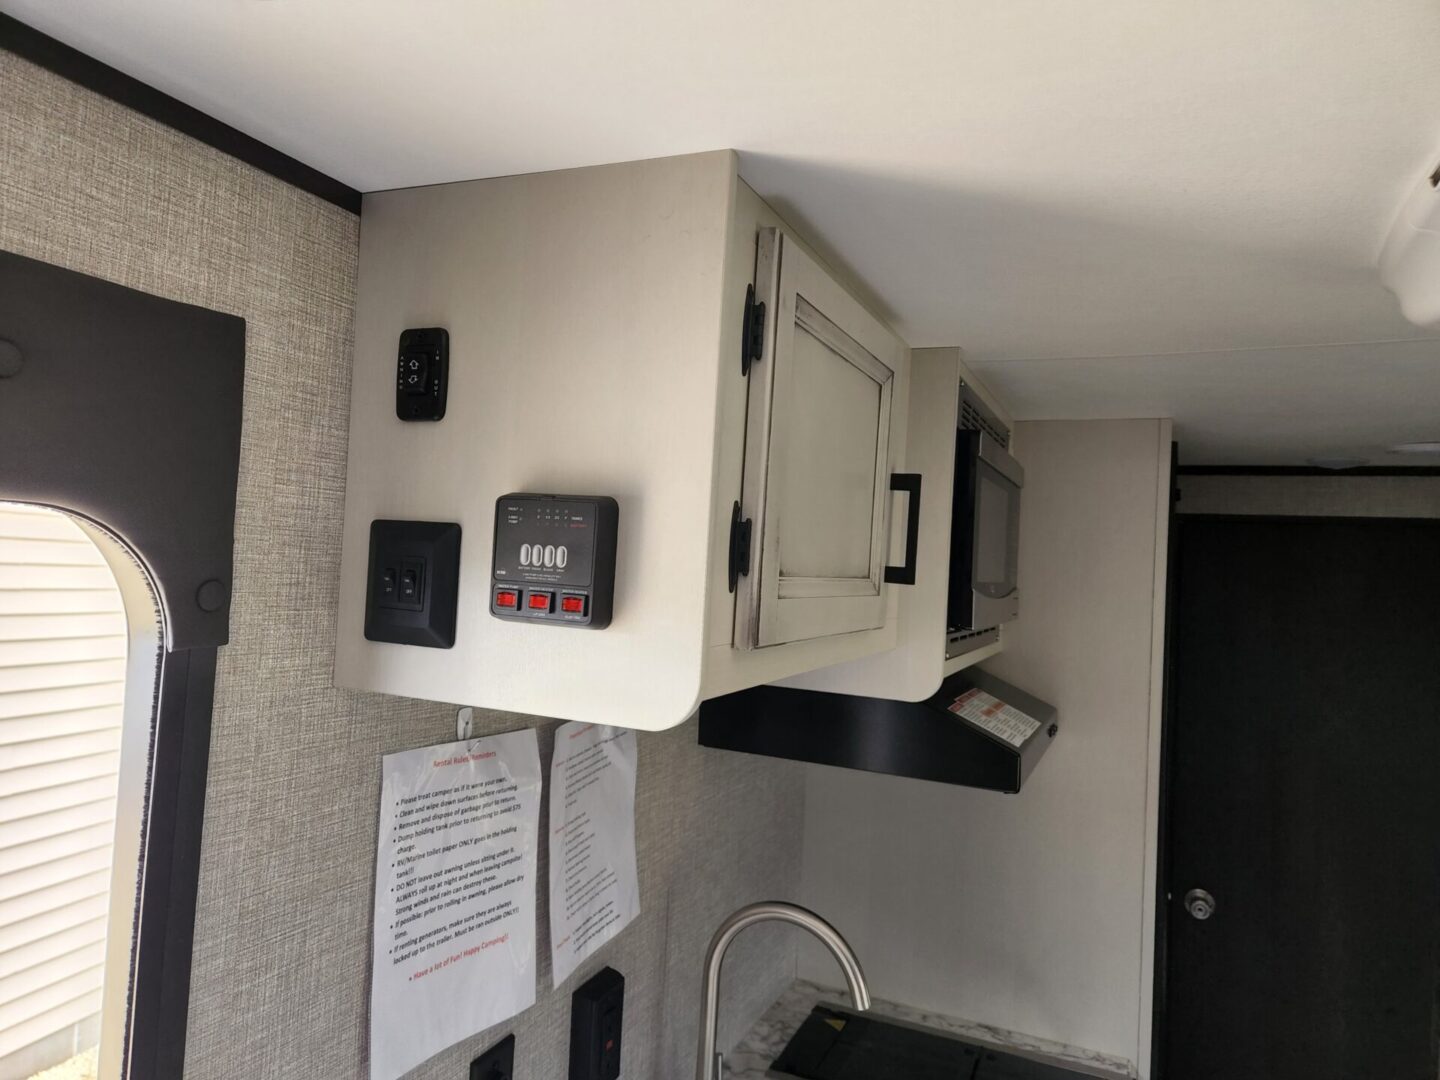 A microwave oven sitting on top of a wall.